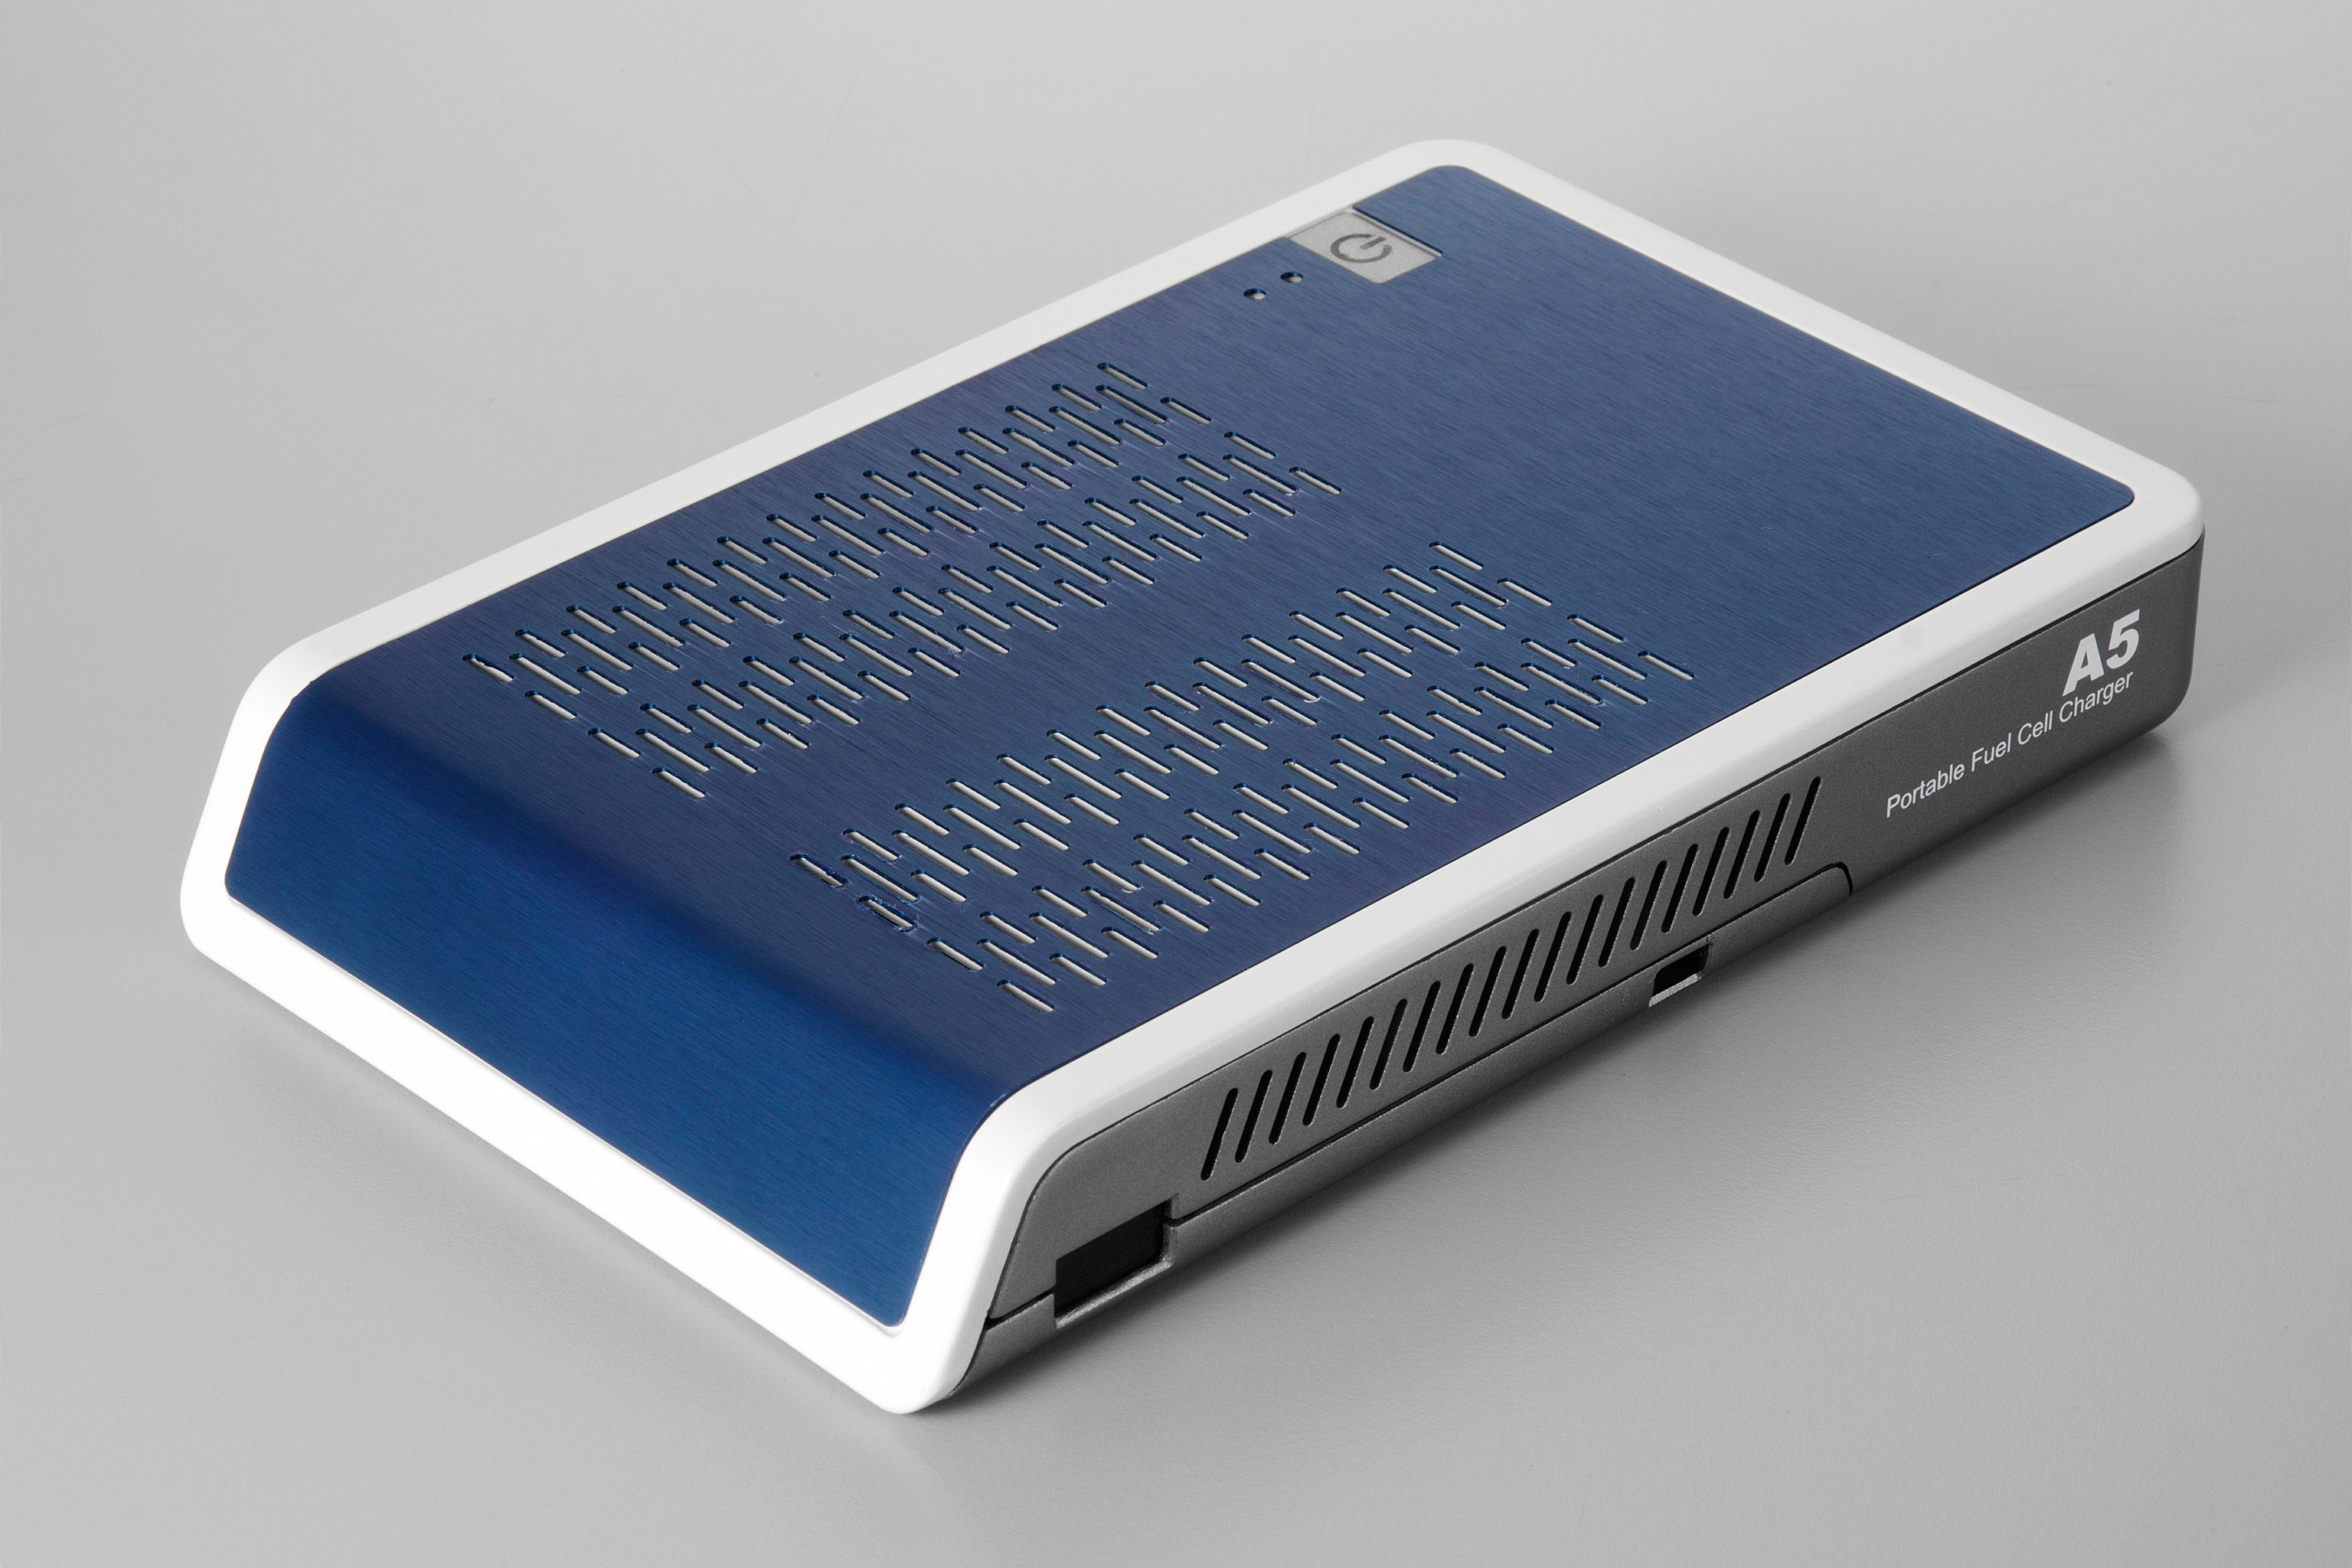 Antig's A5 Portable Fuel Cell Charger